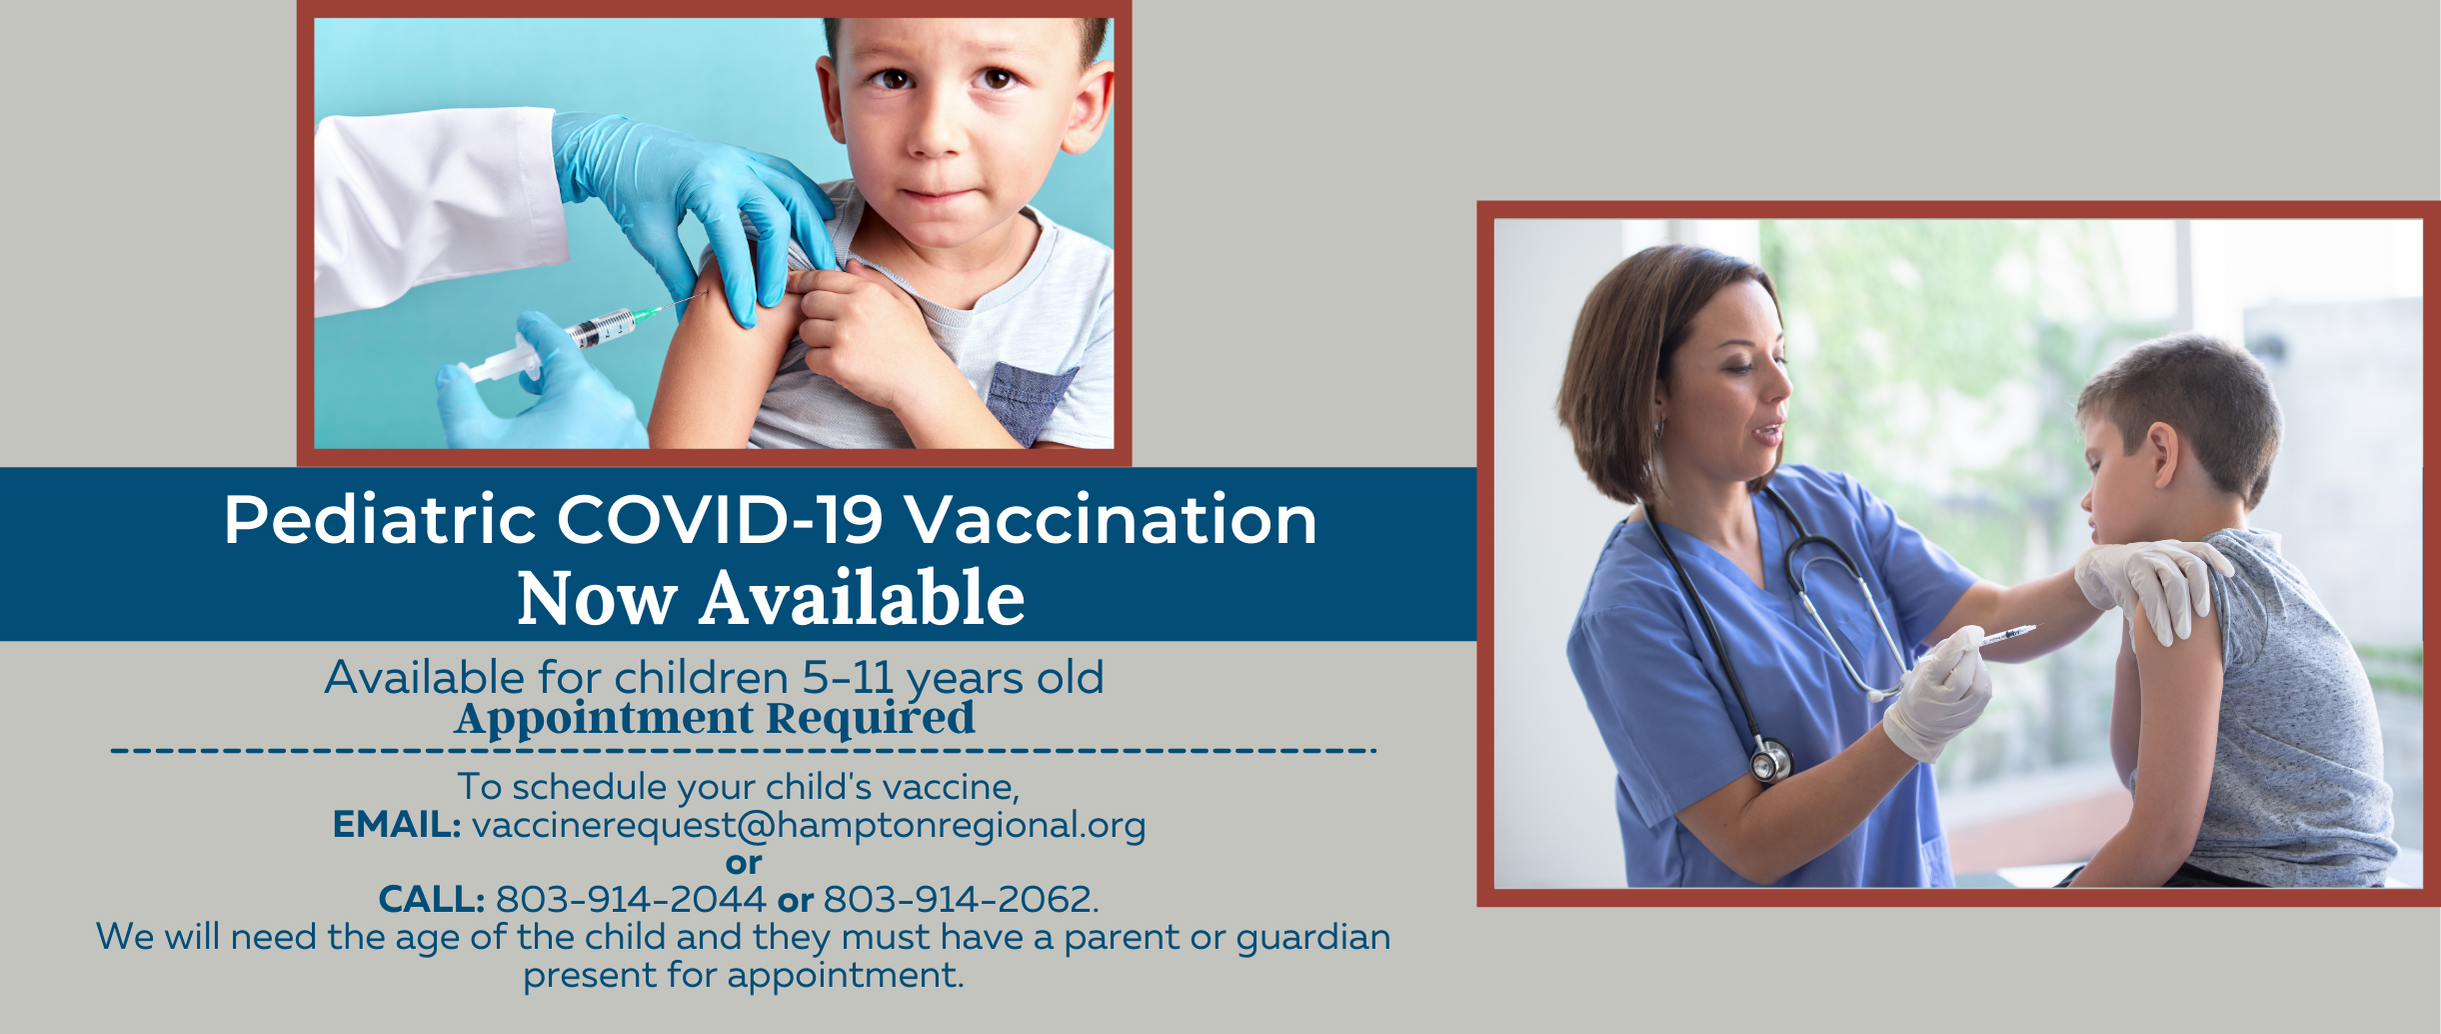 Banner picture of two separate pictures of two little boys getting the Covid-19 Vaccine shot by Nurses. Banner says:

Pediatric COVID-19 Vaccination Now Available
Available for children 5-11 years old 
Appointment Required
To schedule your child's vaccine,
EMAIL: vaccinerequest@hamptonregional.org or
CALL: 803-914-2044 or 803-914-2062. We will need the age of the child and they must have a parent or guardian present for appointment.